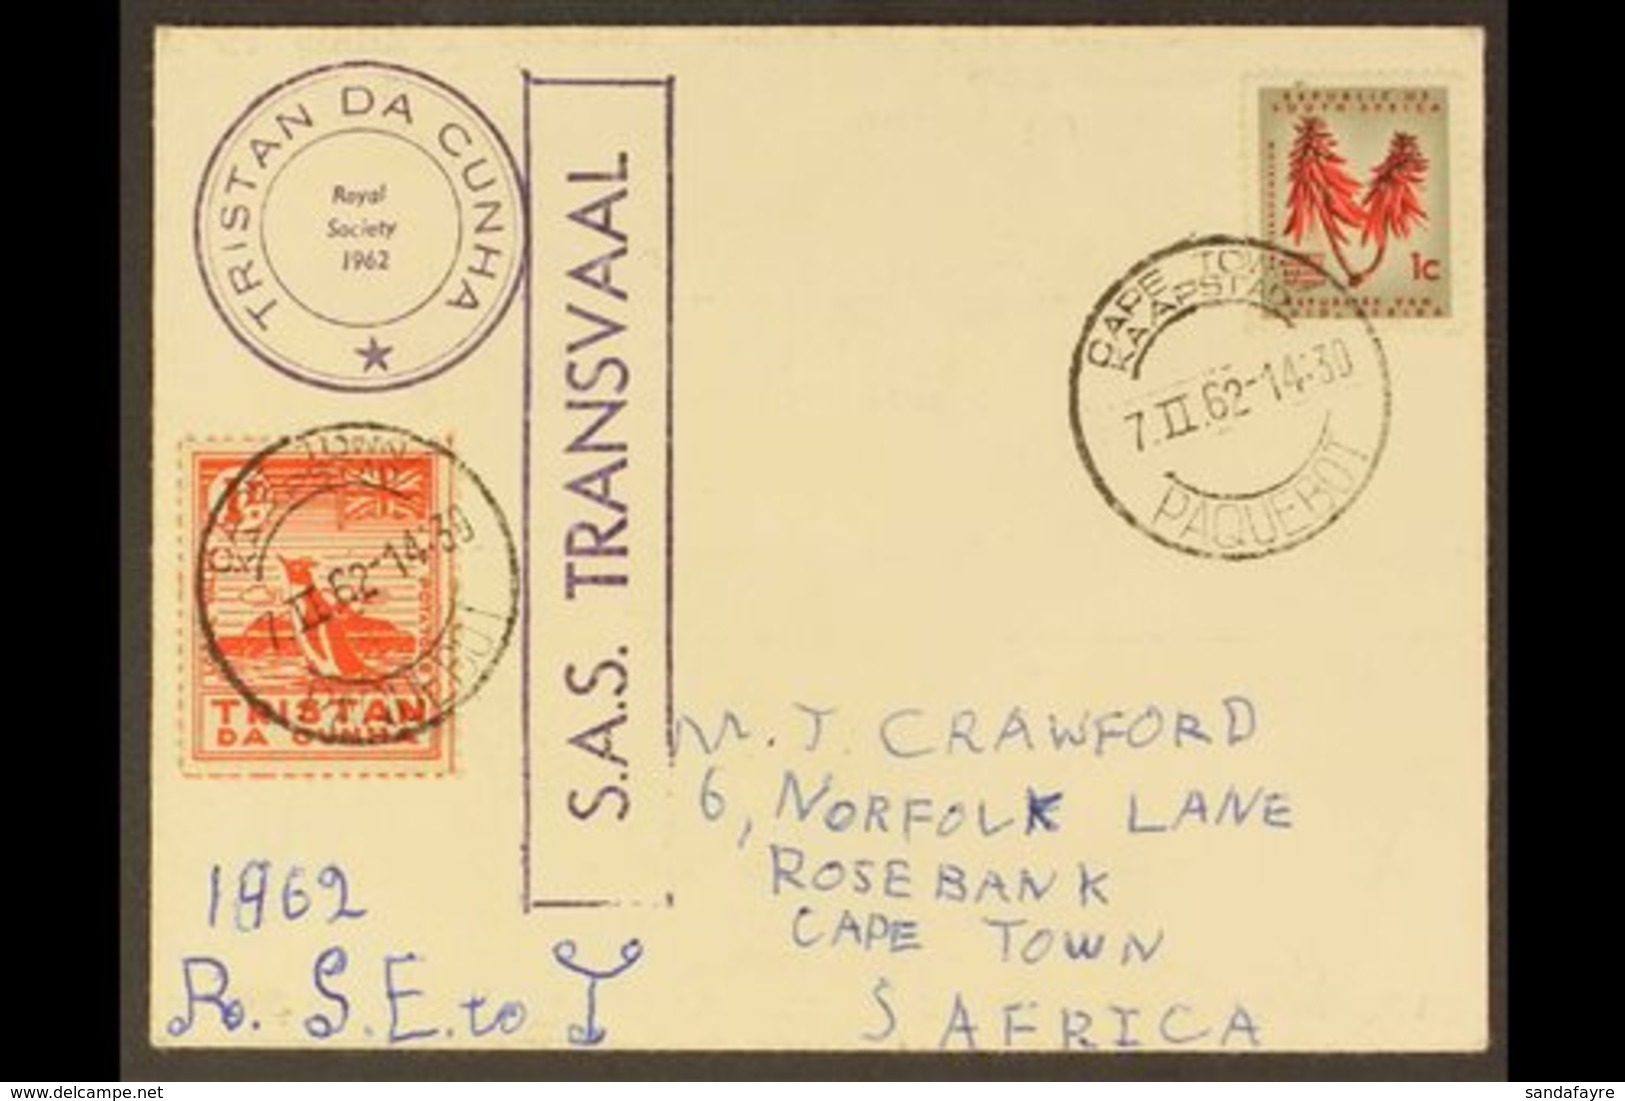 1962 "POTATO STAMP" COVER  1962 (7 FEB) To South Africa Bearing 1946 1d Red (4 Potatoes) Local Value Stamp Featuring Pen - Tristan Da Cunha